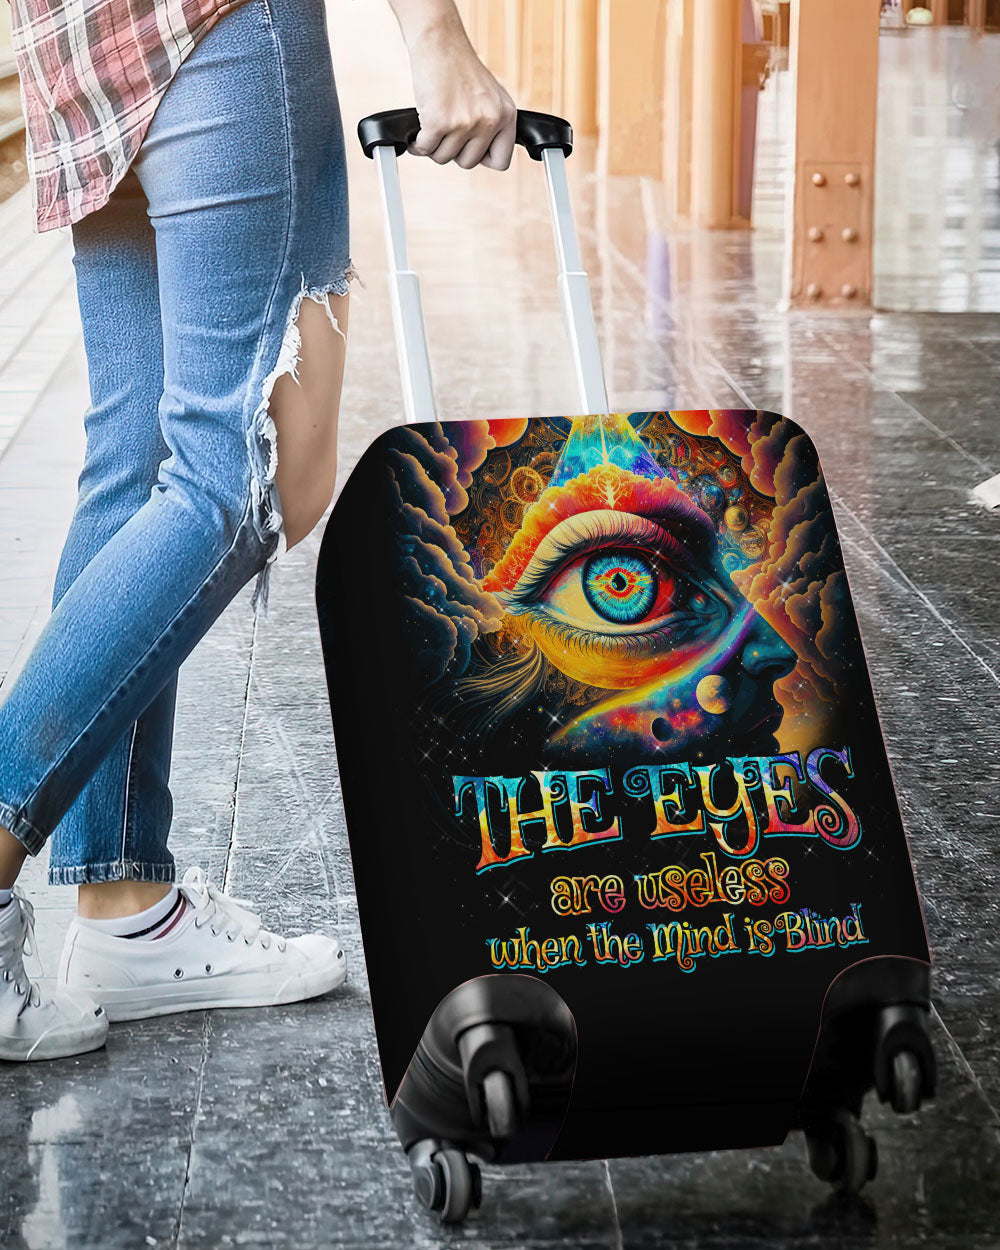 PERSONALIZED THE EYES ARE USELESS WHEN THE MIND IS BLIND LUGGAGE COVER - TYTM2103235